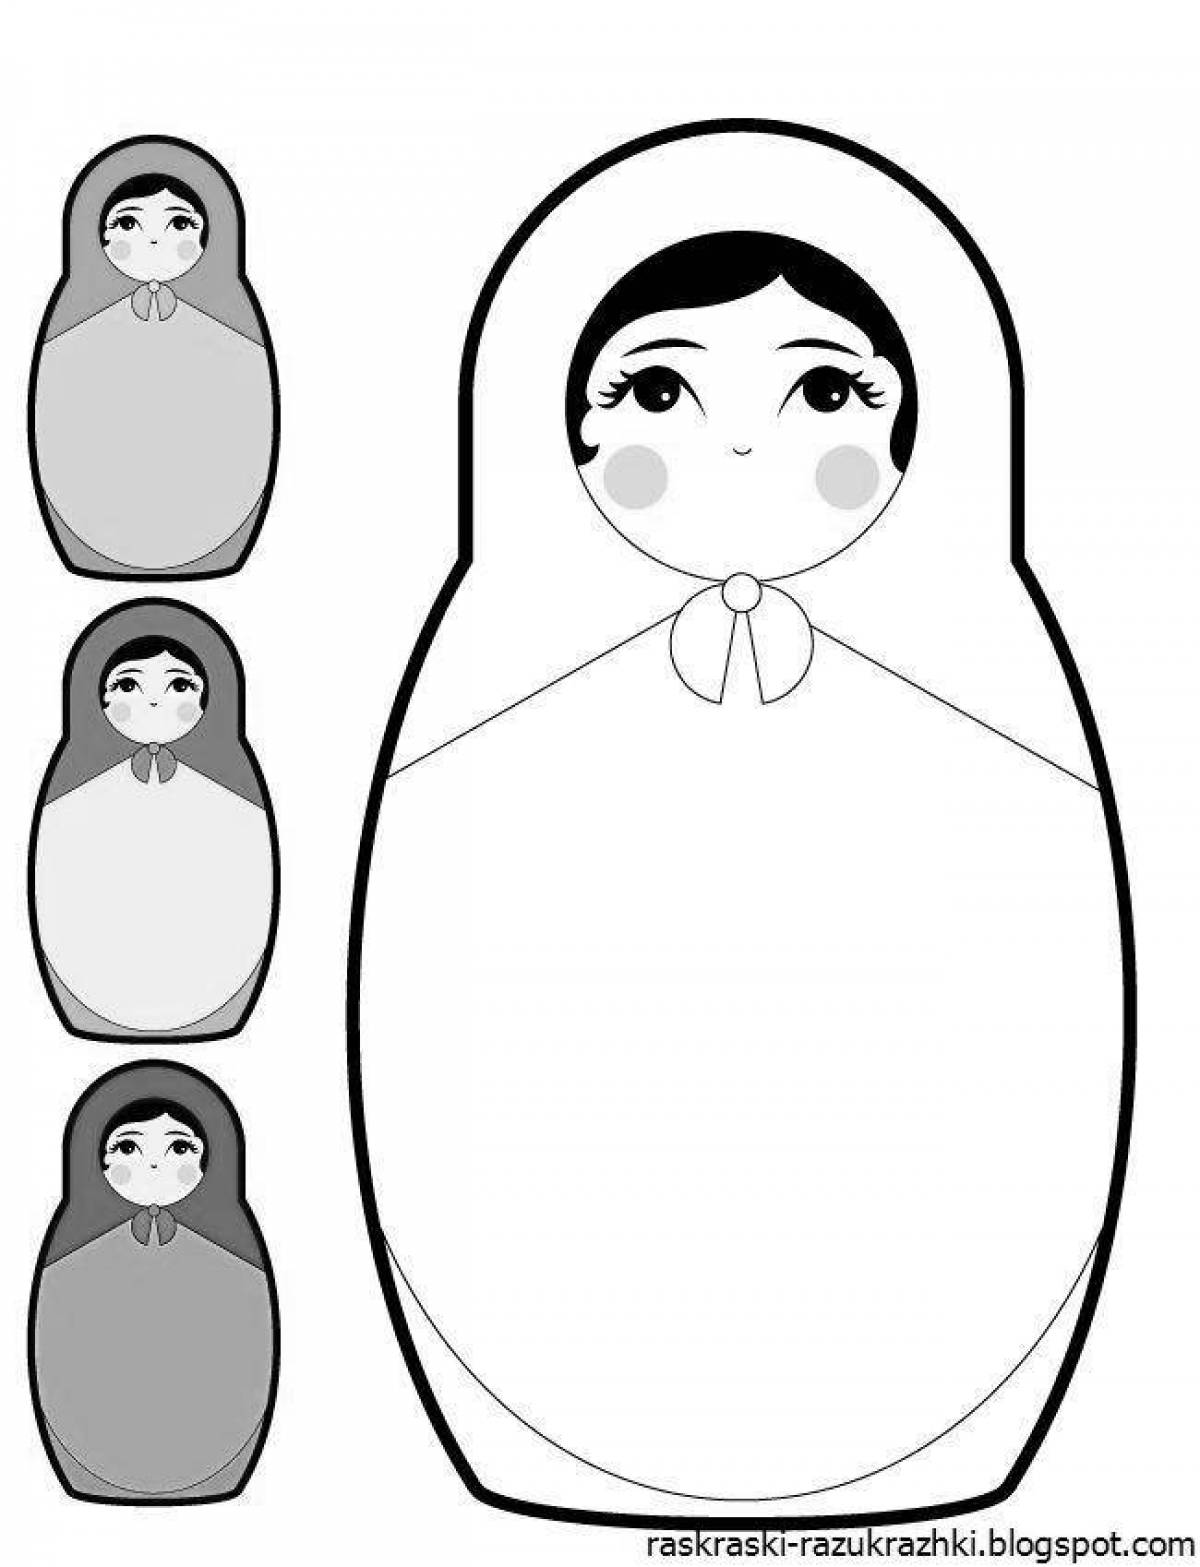 Coloring matryoshka for children 2-3 years old